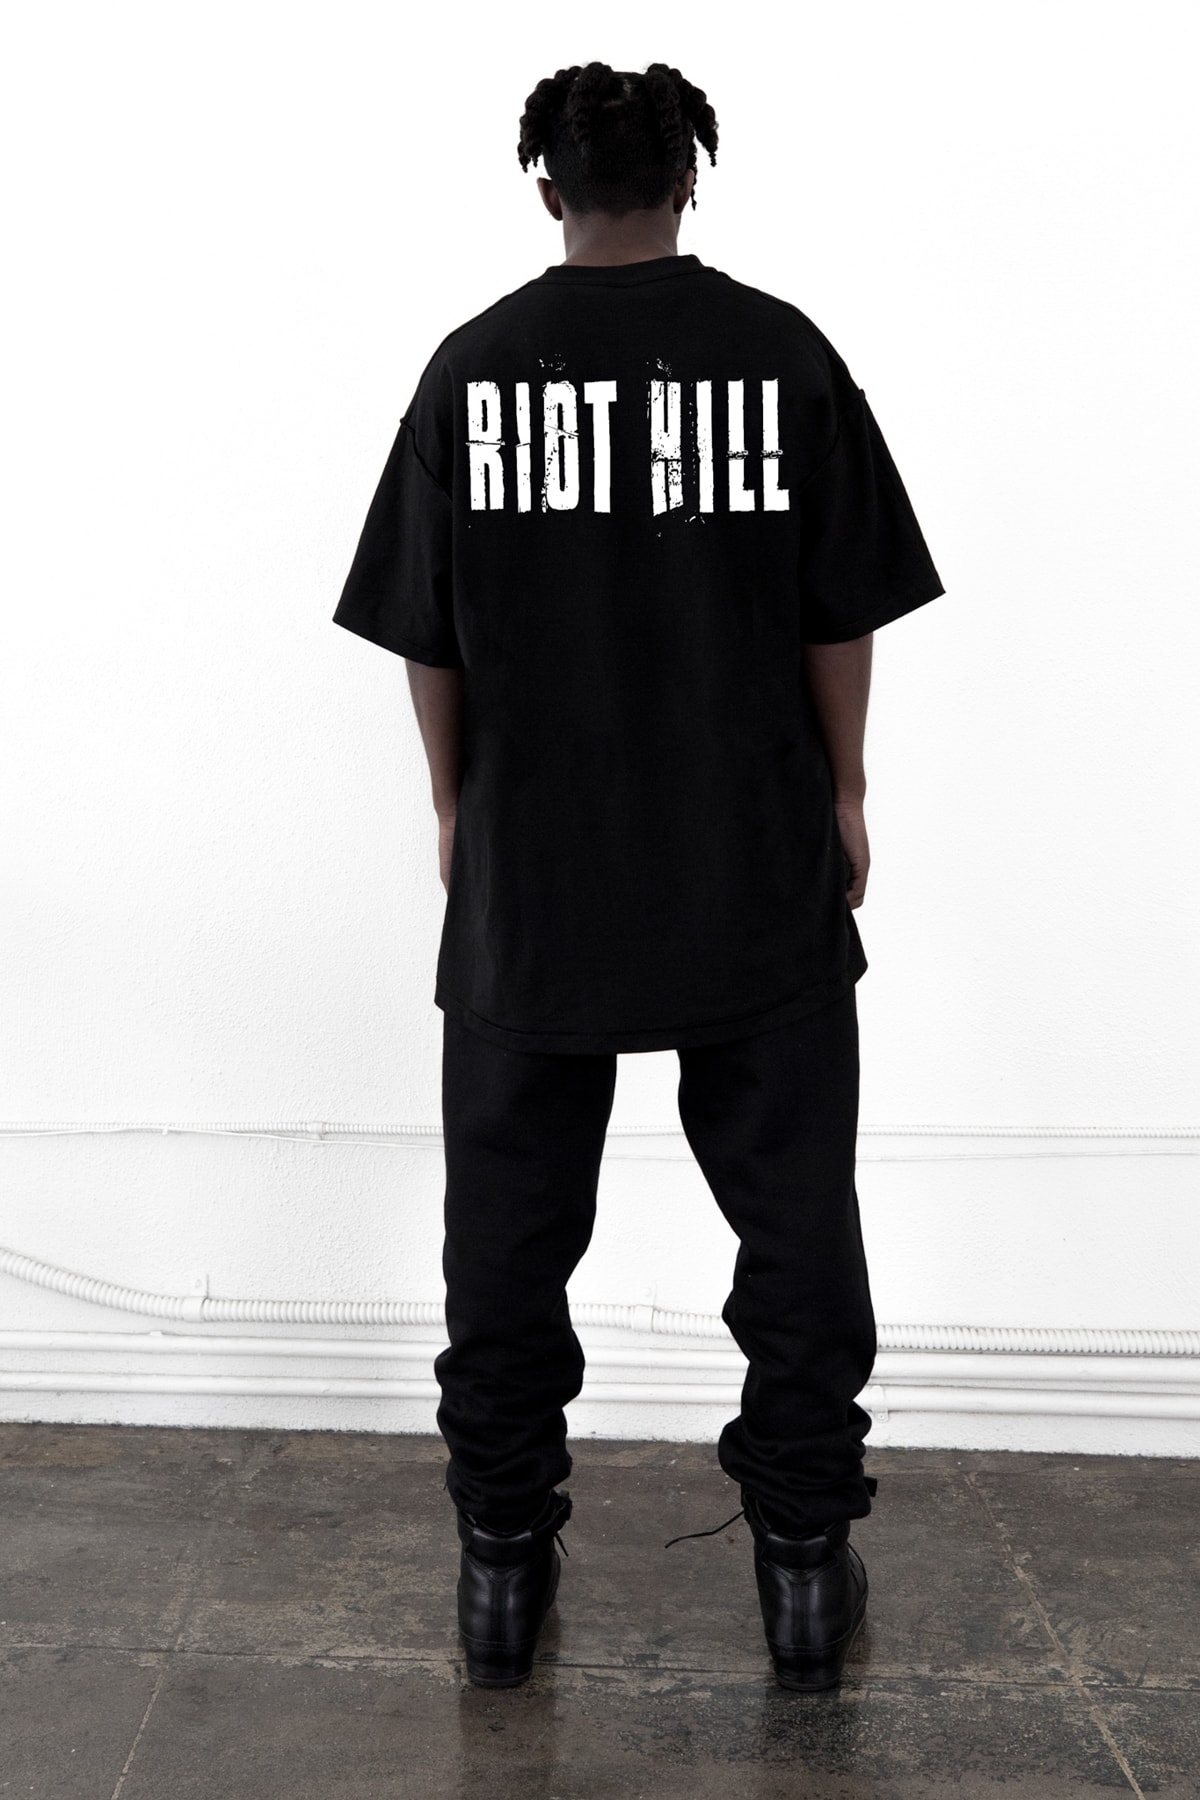 RIOT HILL™ Collection lookbook tactical military vests jackets hoodies sweaters release info